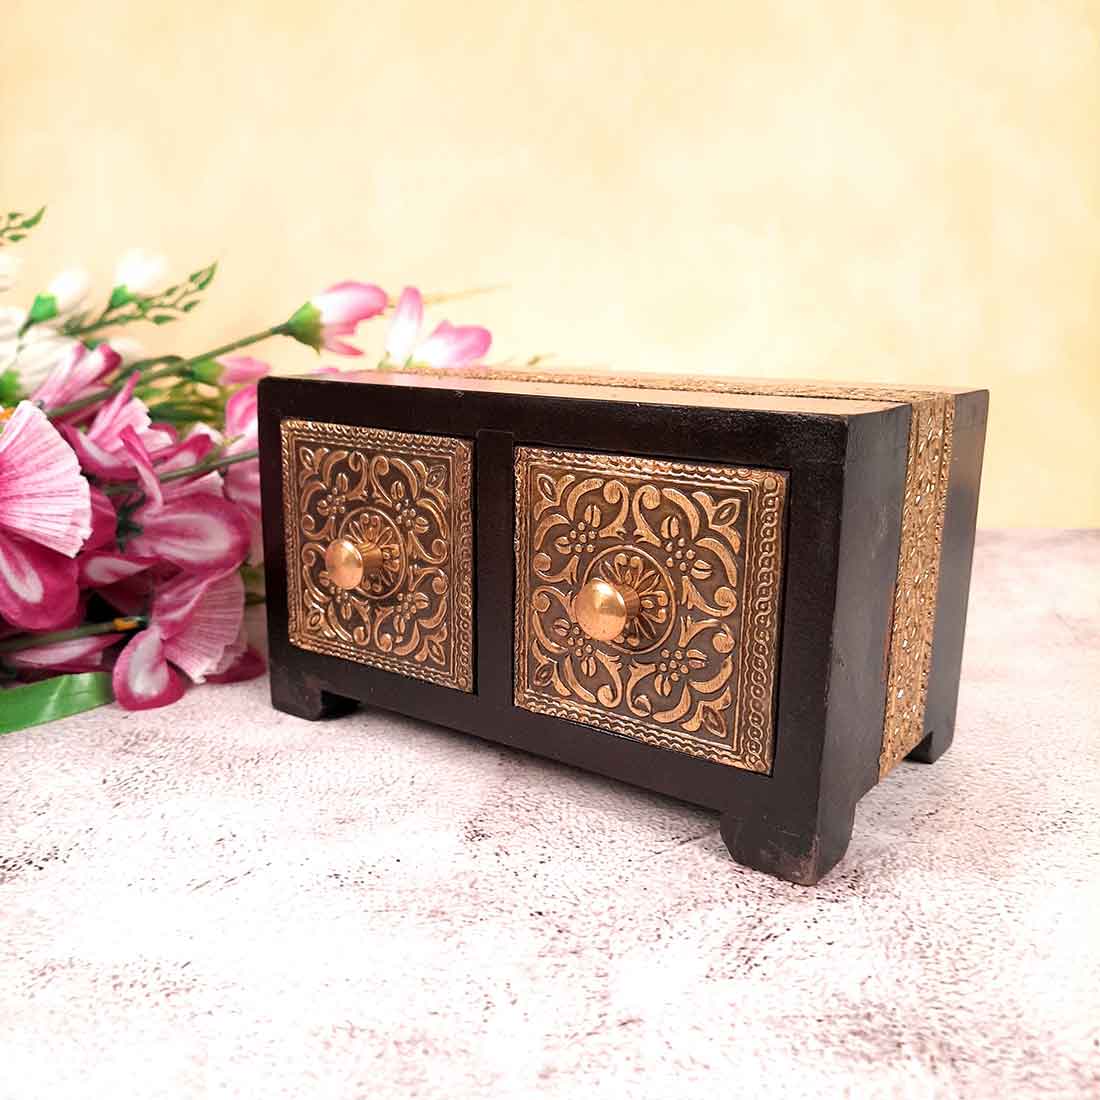 Jewelry Box Antique | Brass Jewellery Box - For Wedding & Anniversary Gift | Organizer for Rings, Necklace, Earrings, Makeup, Dressing Table Decor & Gifts - 7 Inch